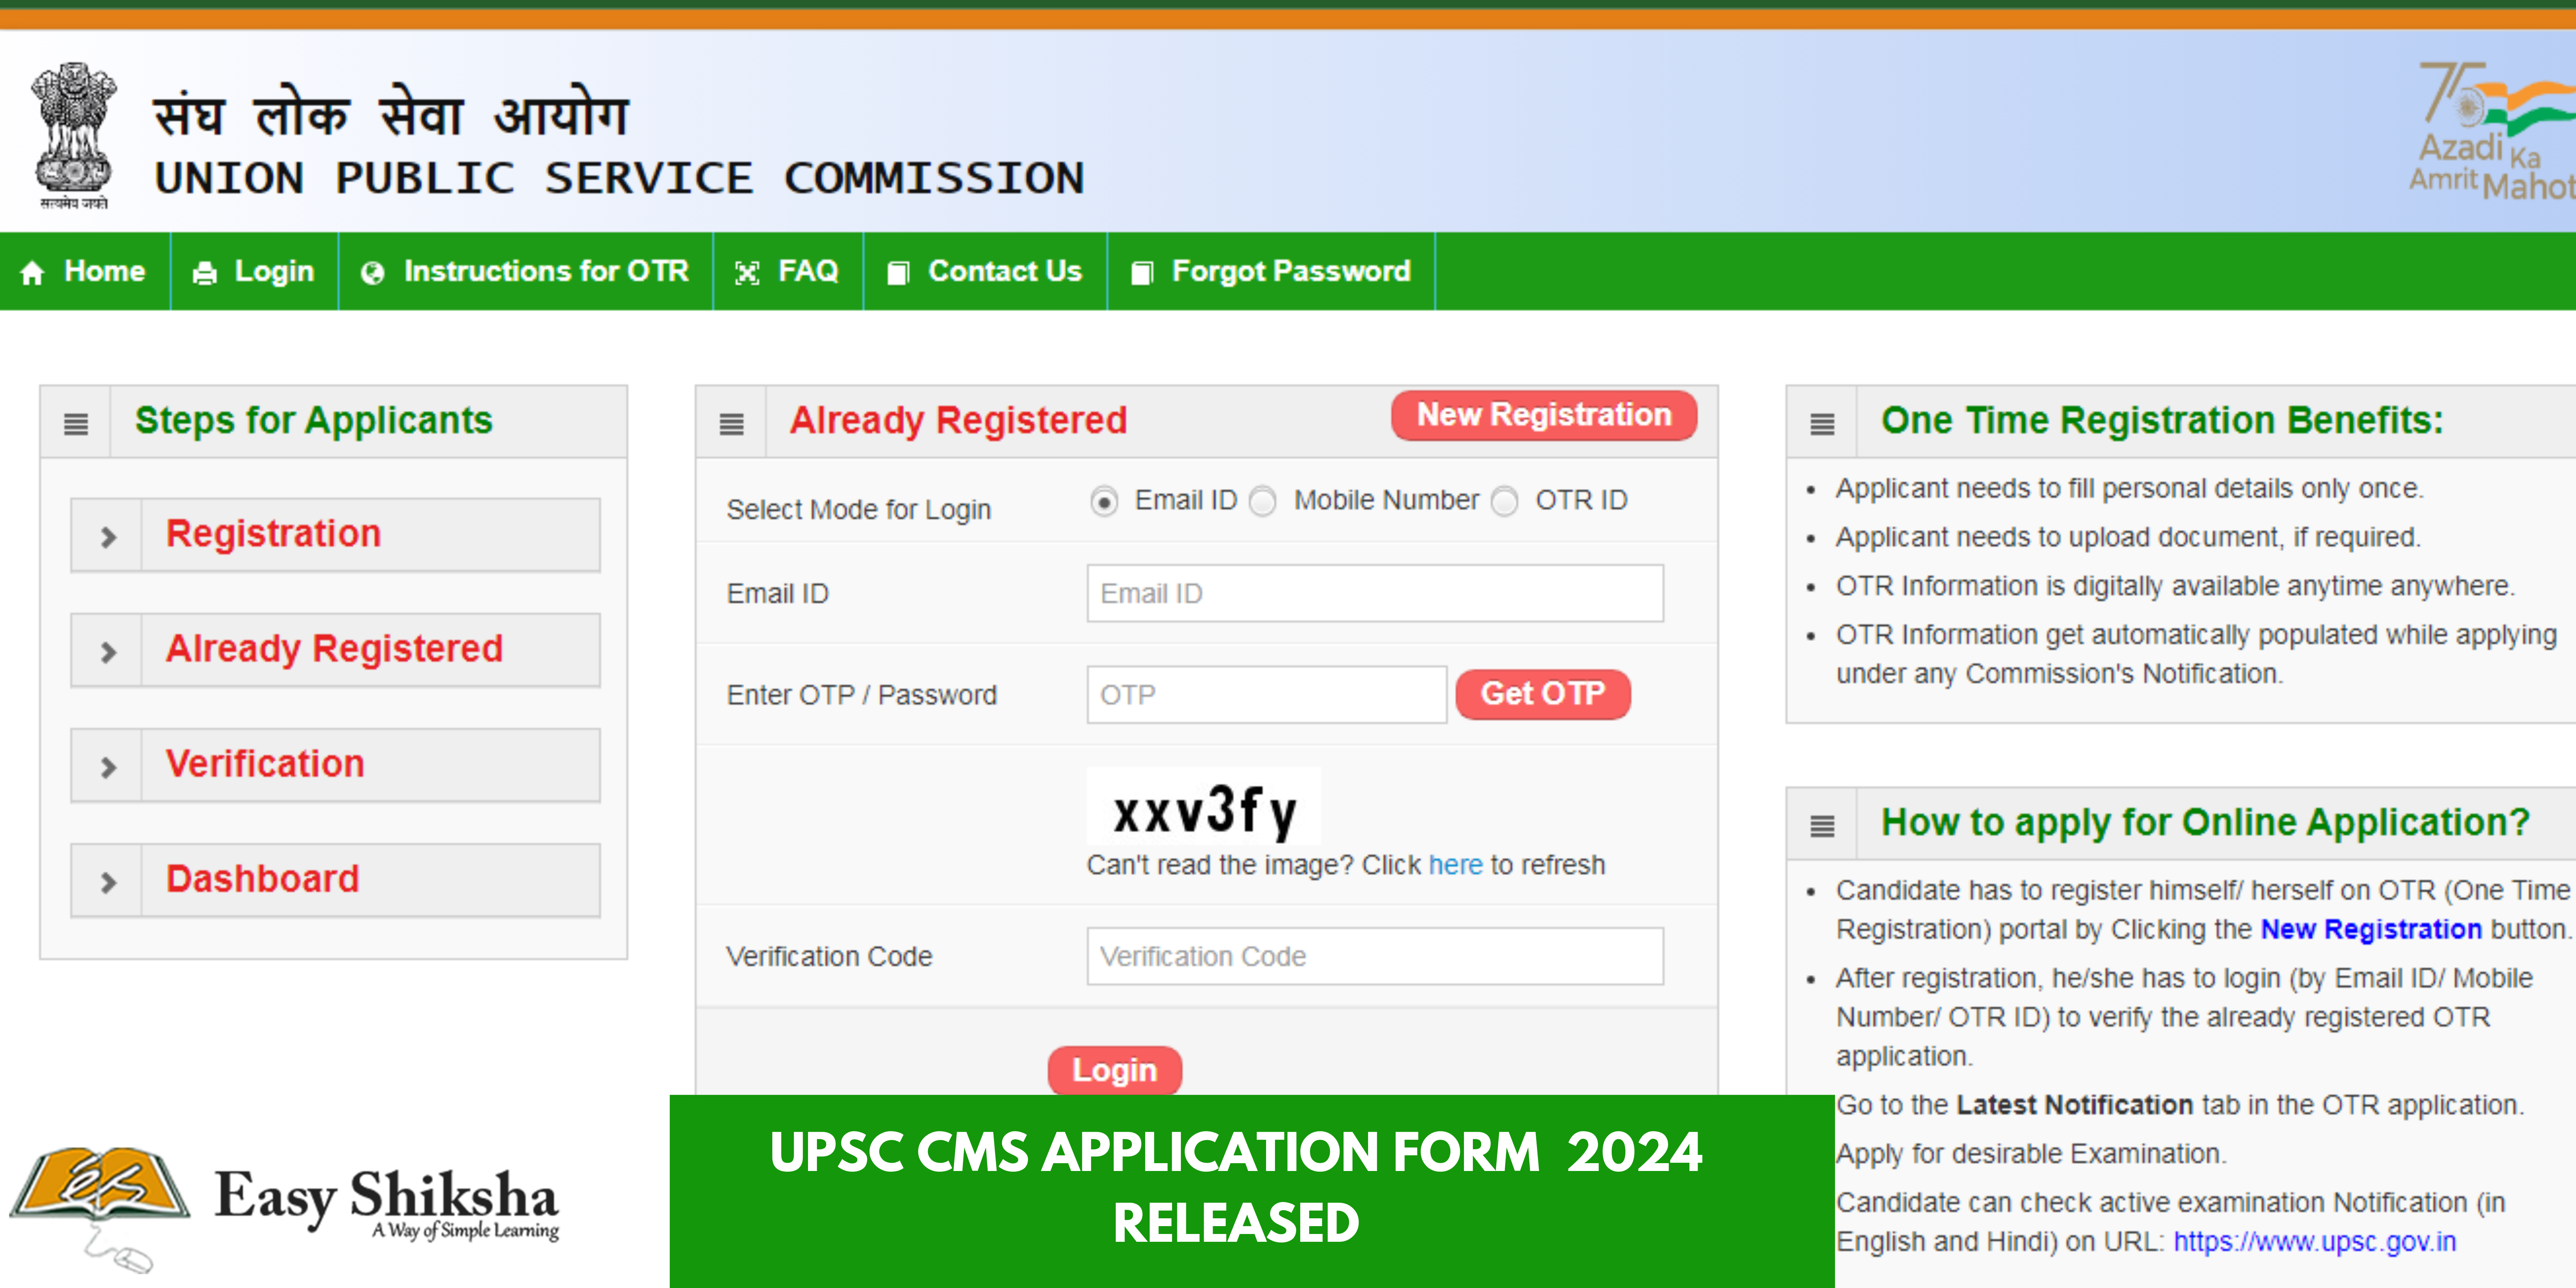 UPSC CMS 2024 Application Form Released